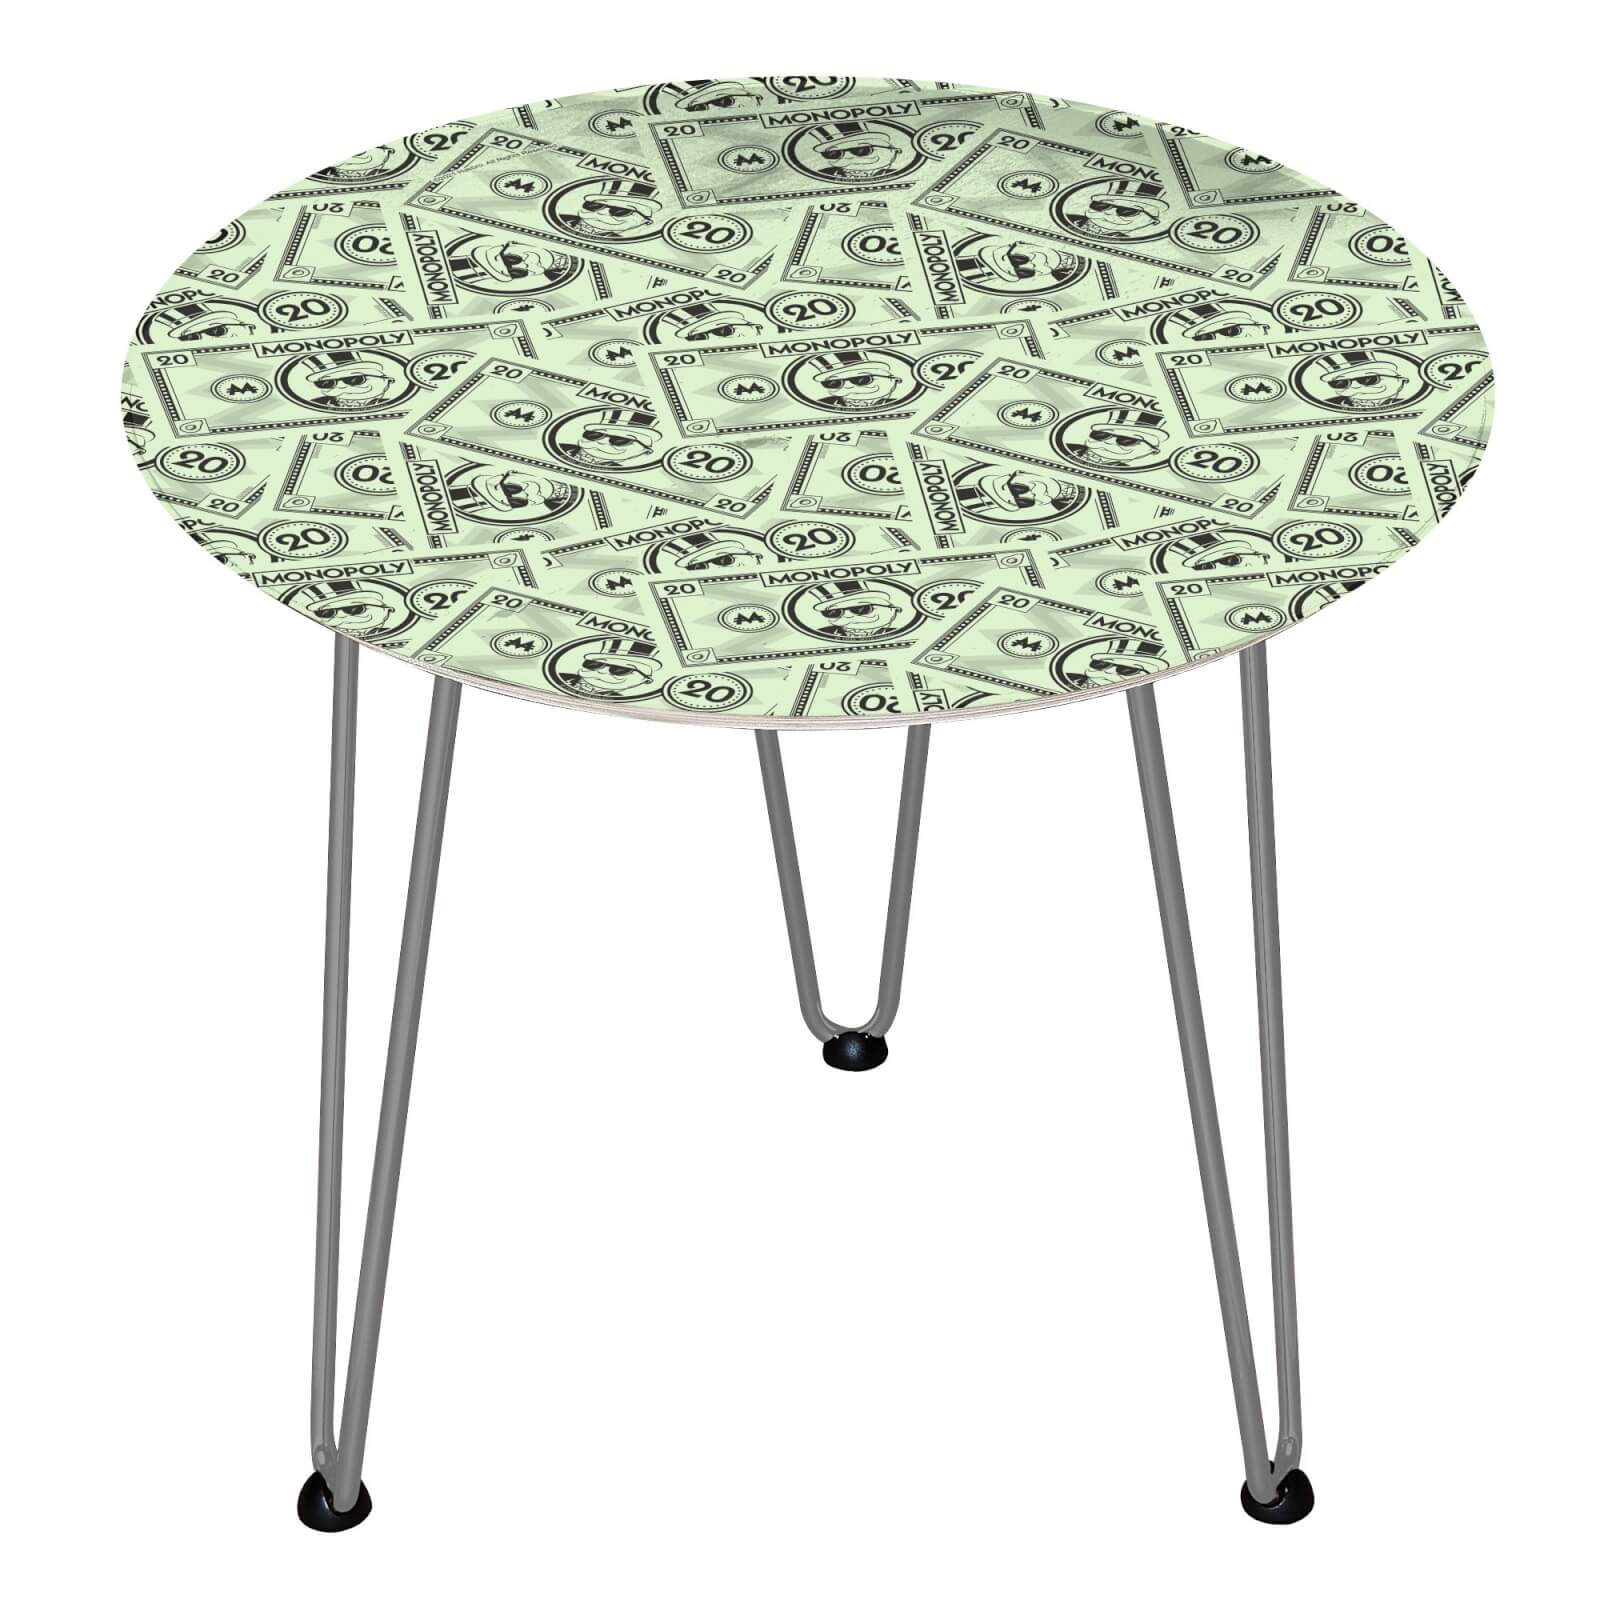 Decorsome Monopoly Money 20 Wooden Side Table - Silver